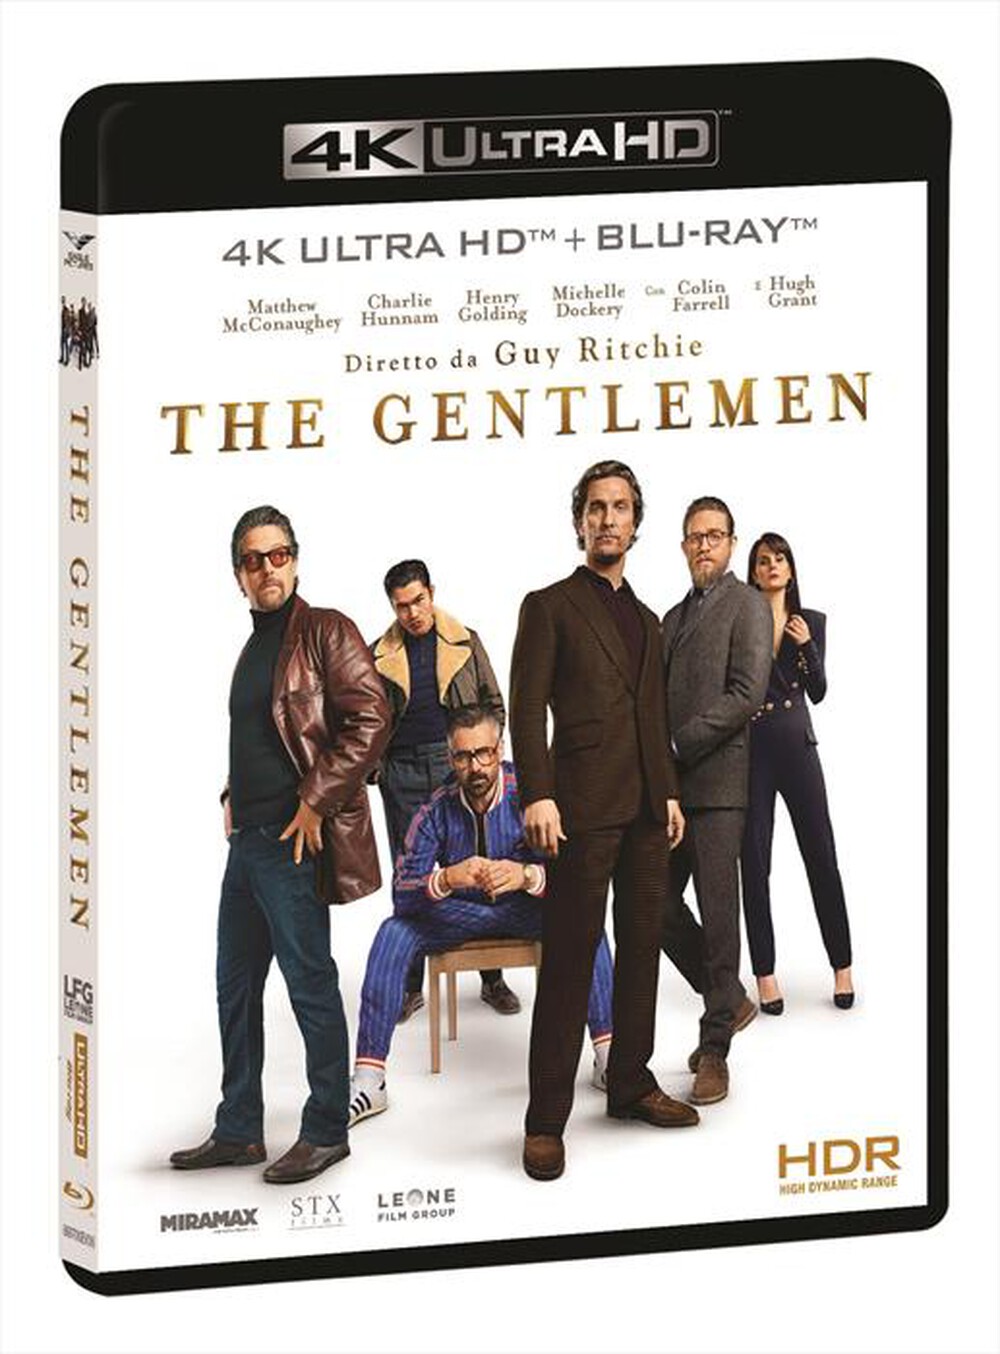 "EAGLE PICTURES - Gentlemen (The) (Blu-Ray 4K+Blu-Ray Hd) - "